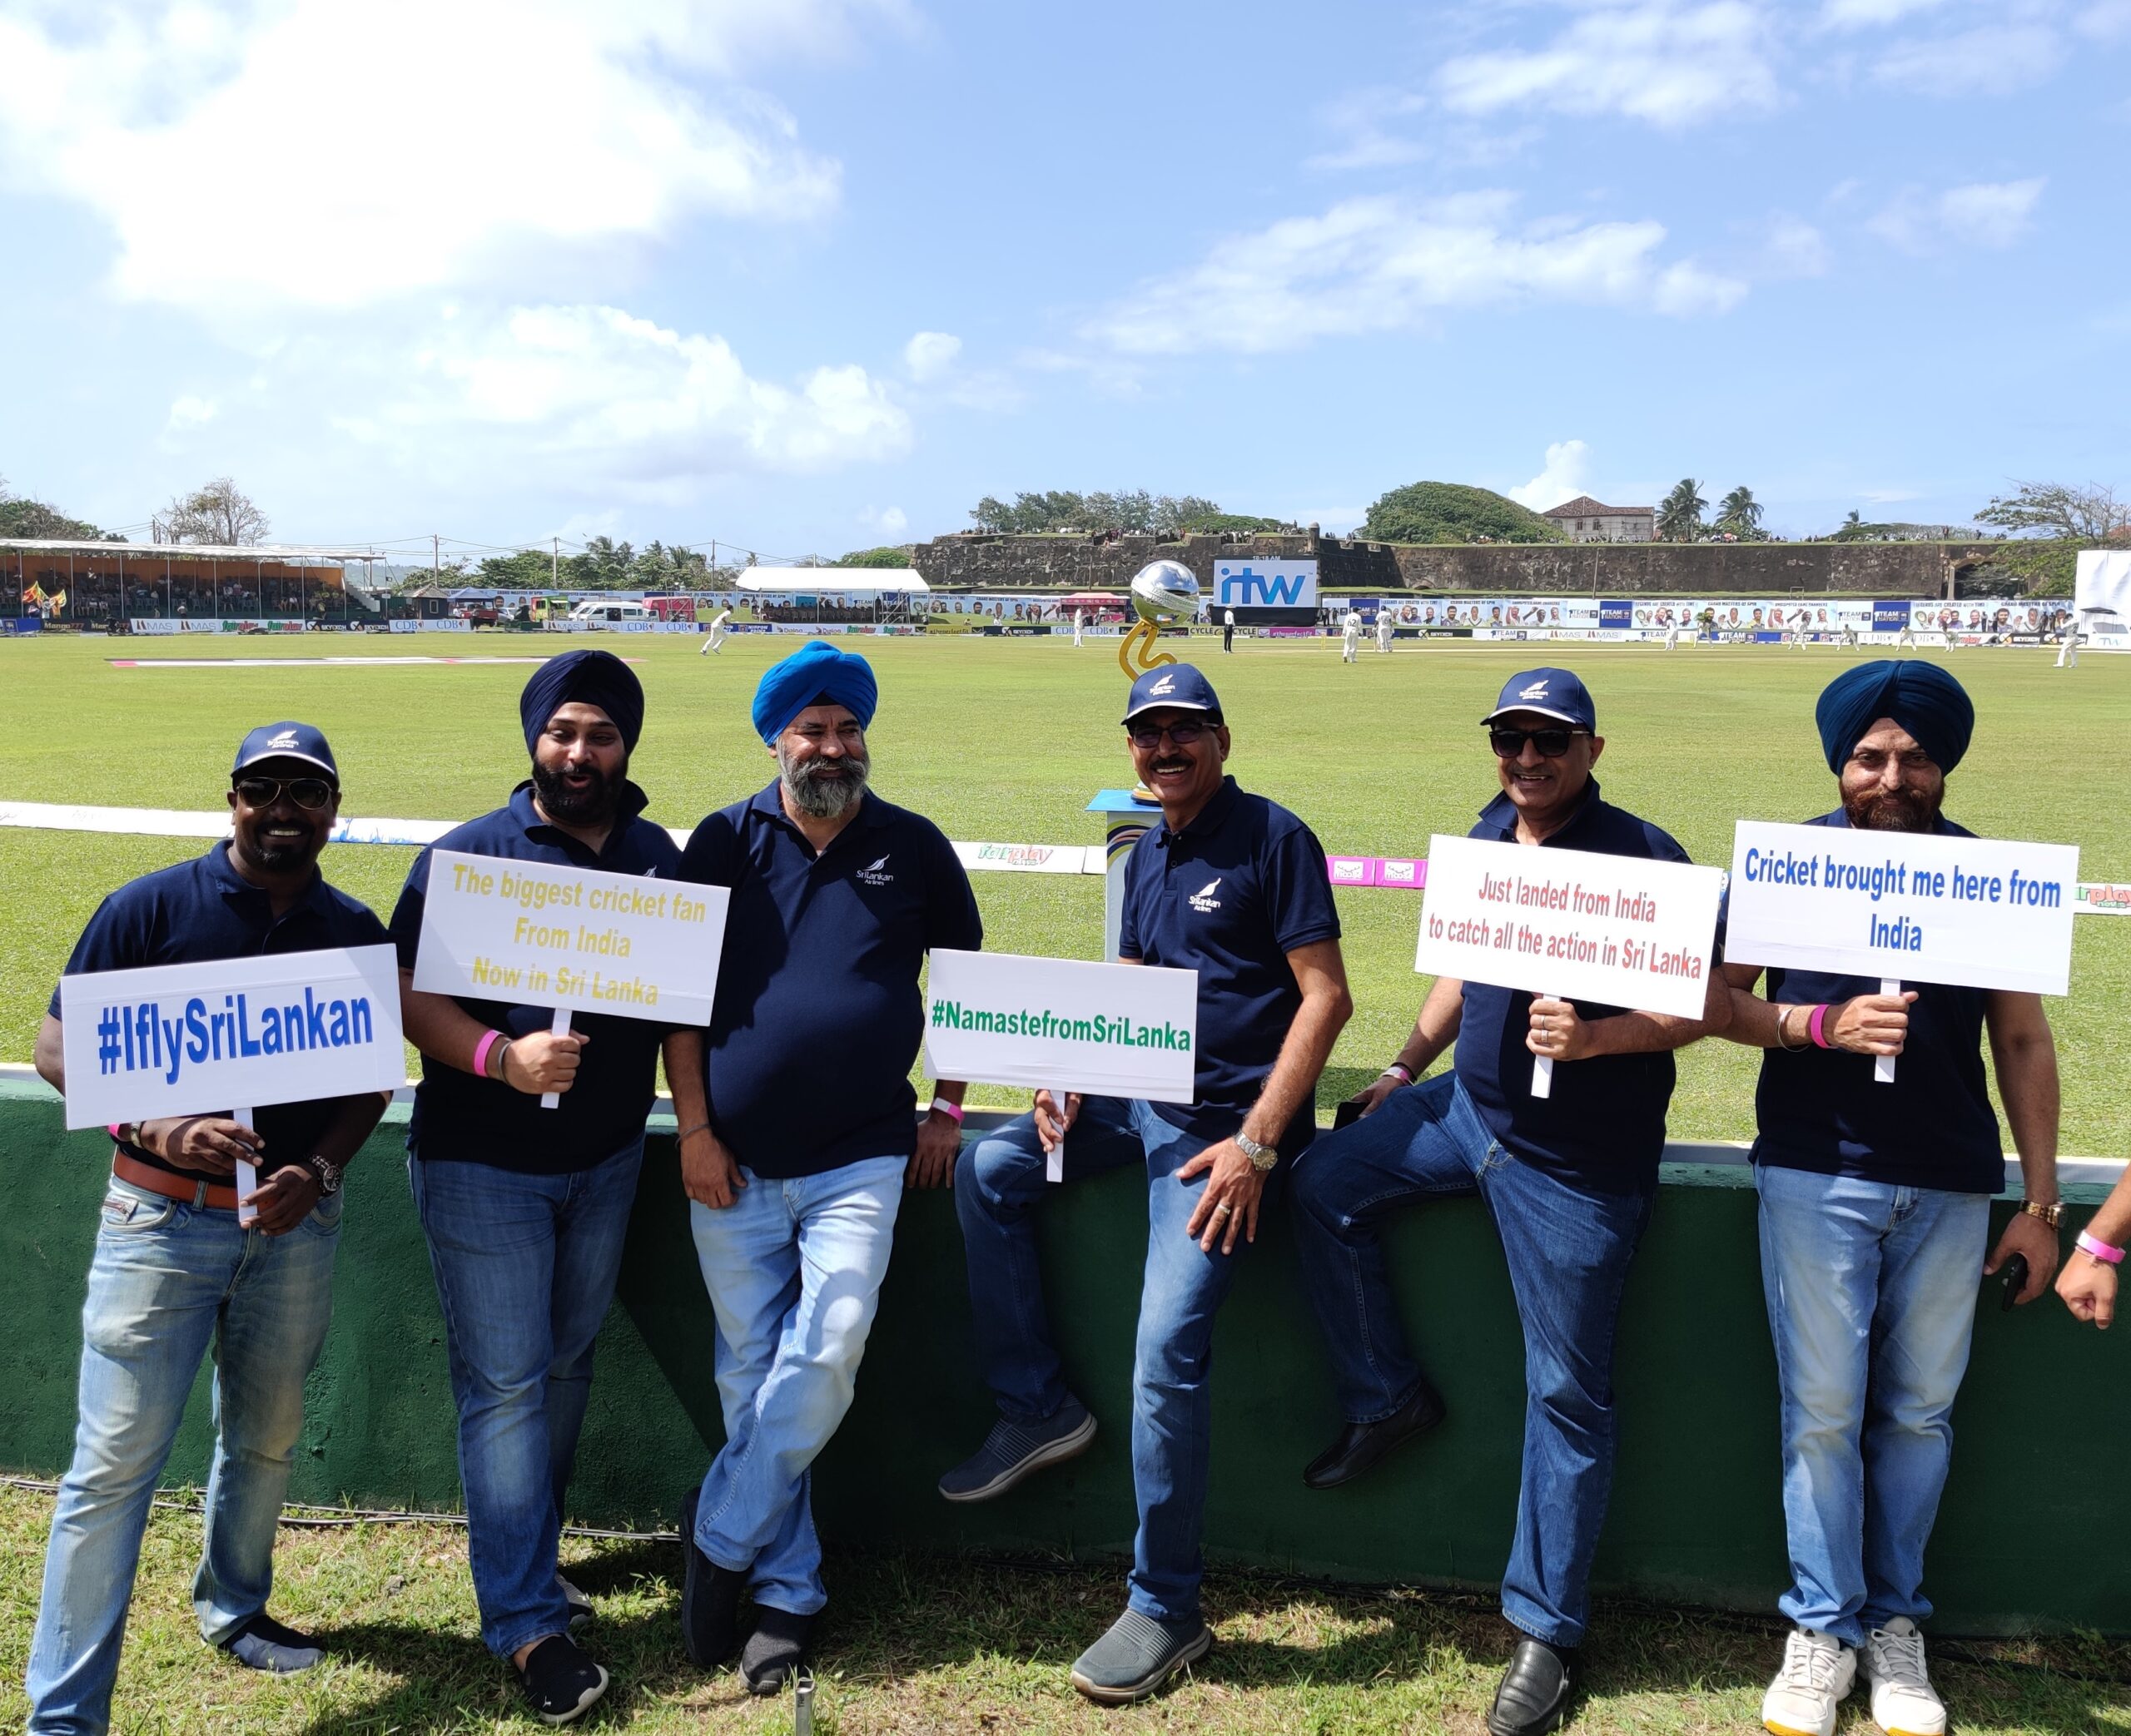 SriLankan Airlines welcomes Top Travel Agents and Elite Sports Influencers for the Sri Lanka Vs Australia Test Series